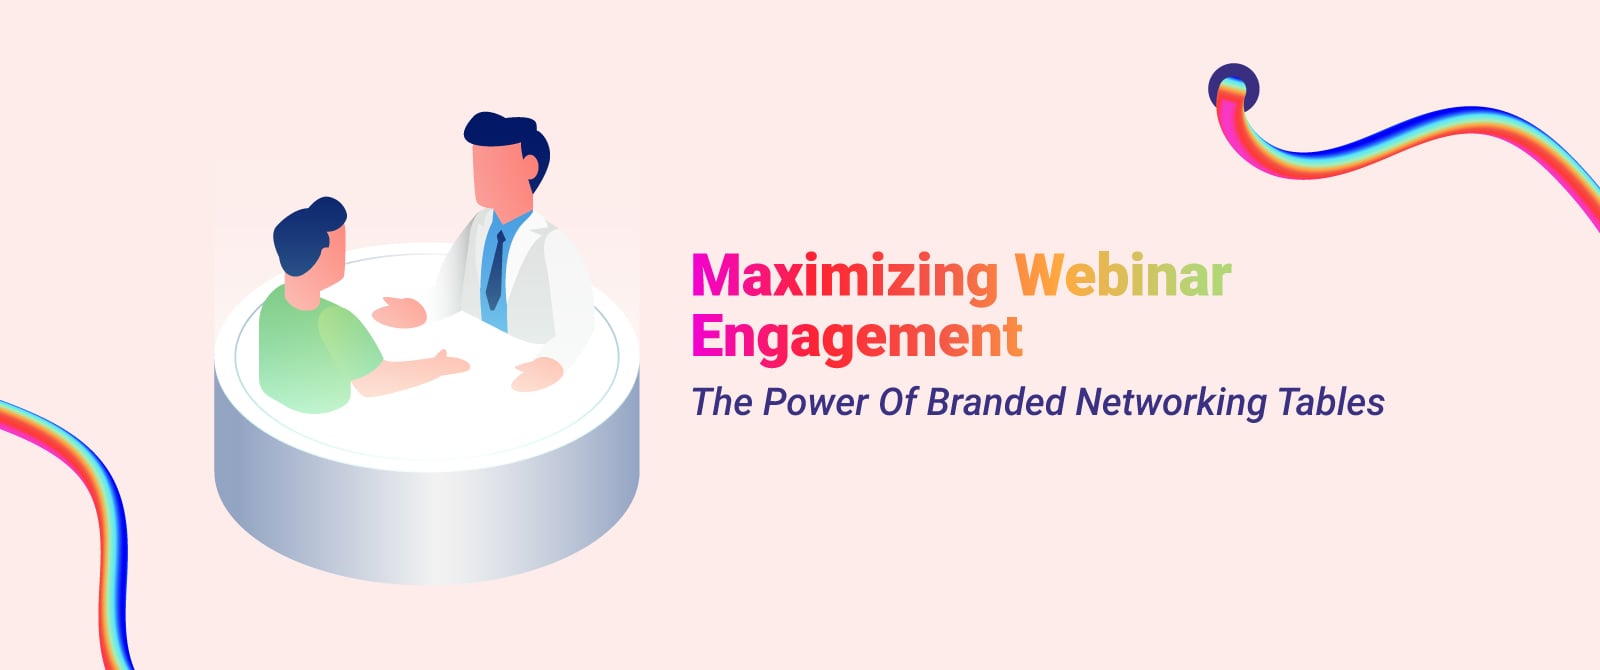 Use Branded Networking Tables to Increase Audience Engagement